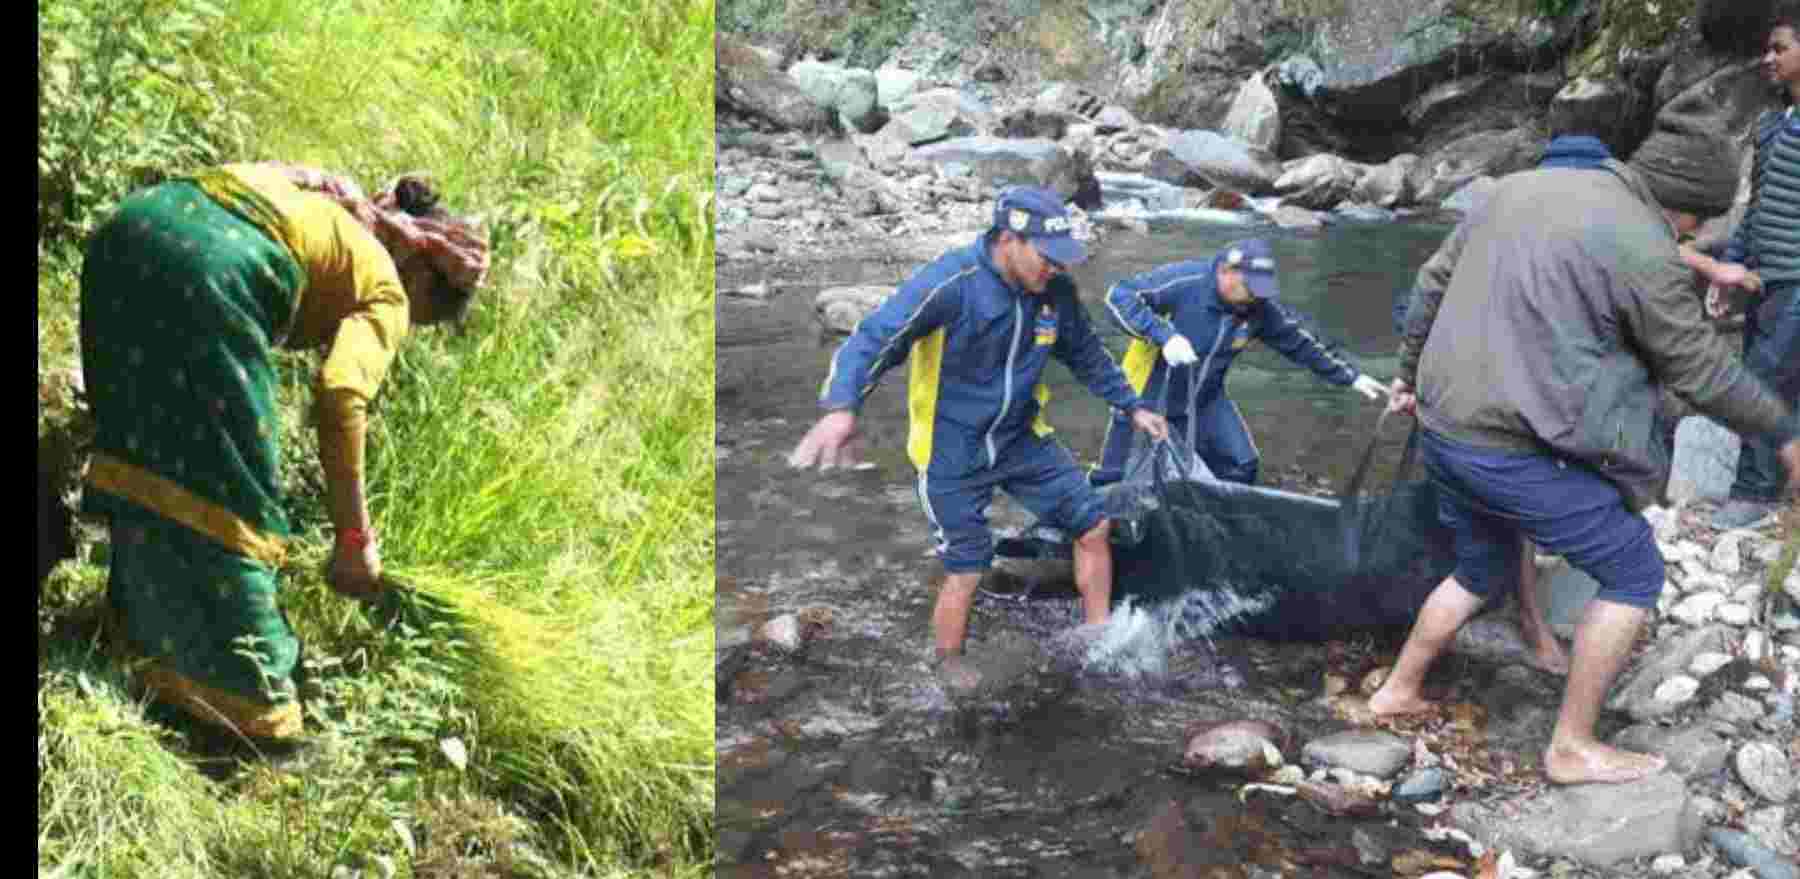 Uttarakhand news today: Pinki Devi of Rudraprayag who went to mow the forest, died after falling in a ditch. Rudraprayag News Today